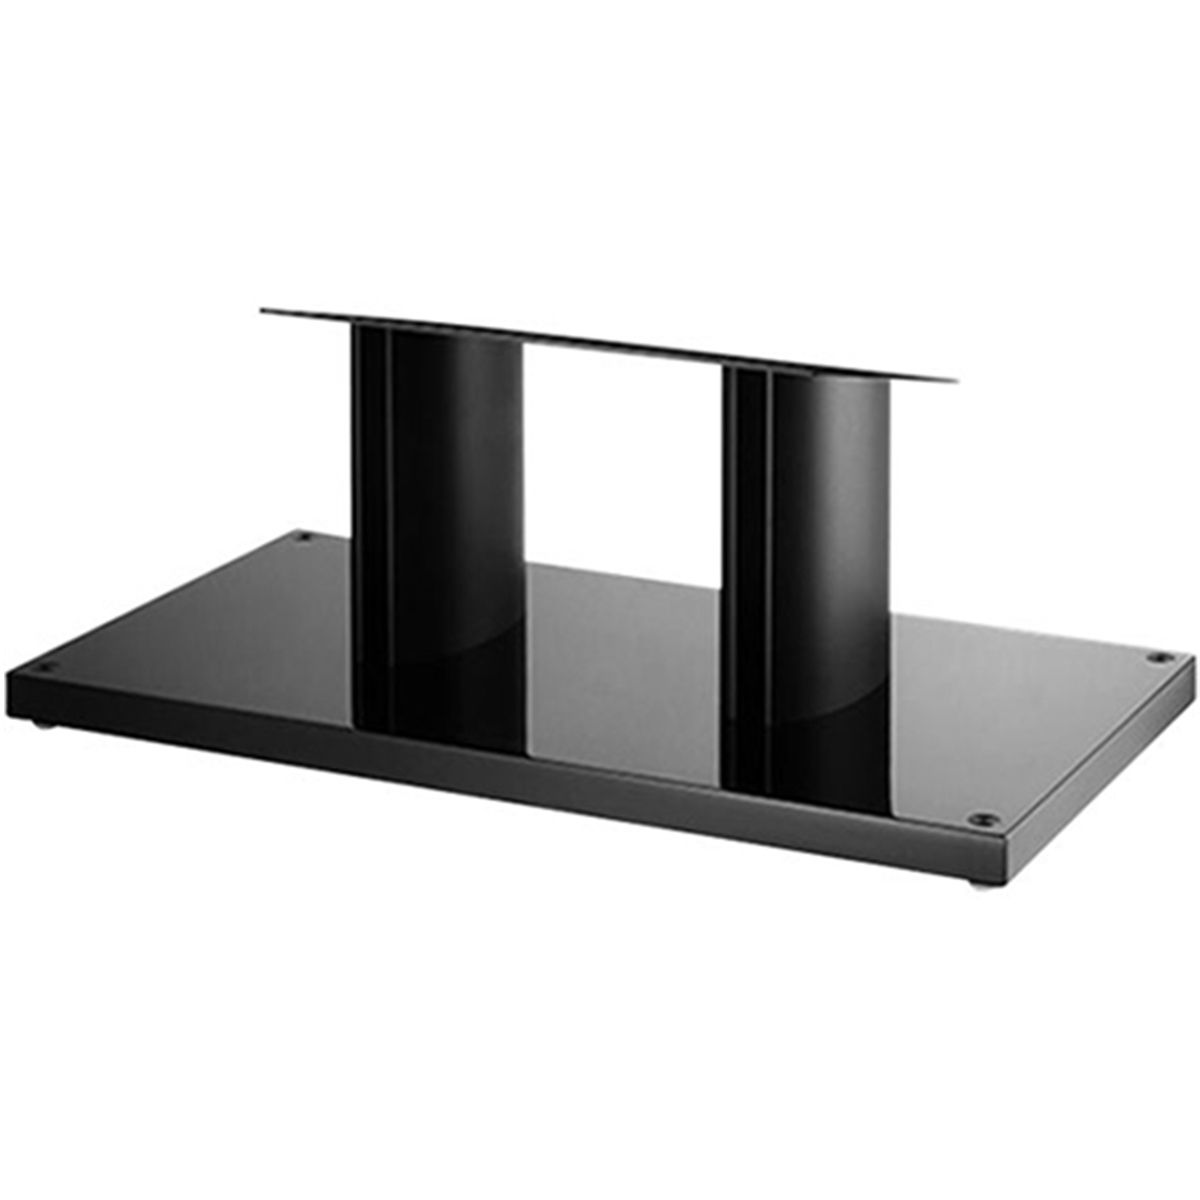 Bowers Wilkins D3 Channel Stand | Audio Advice